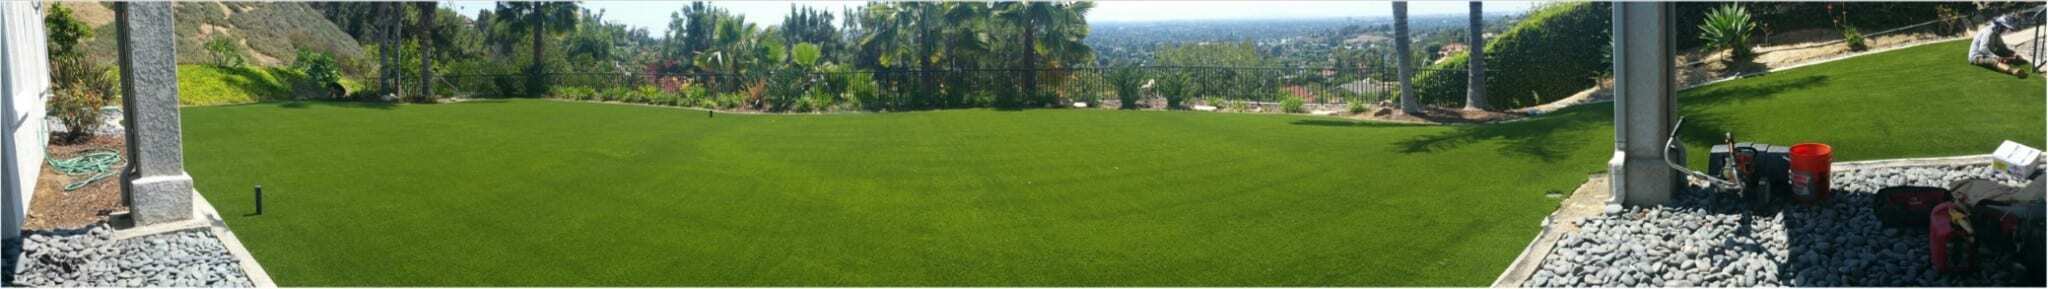 Turf Products, Artificial Grass Golf, Play, & Pet Landscapes, Los Angeles